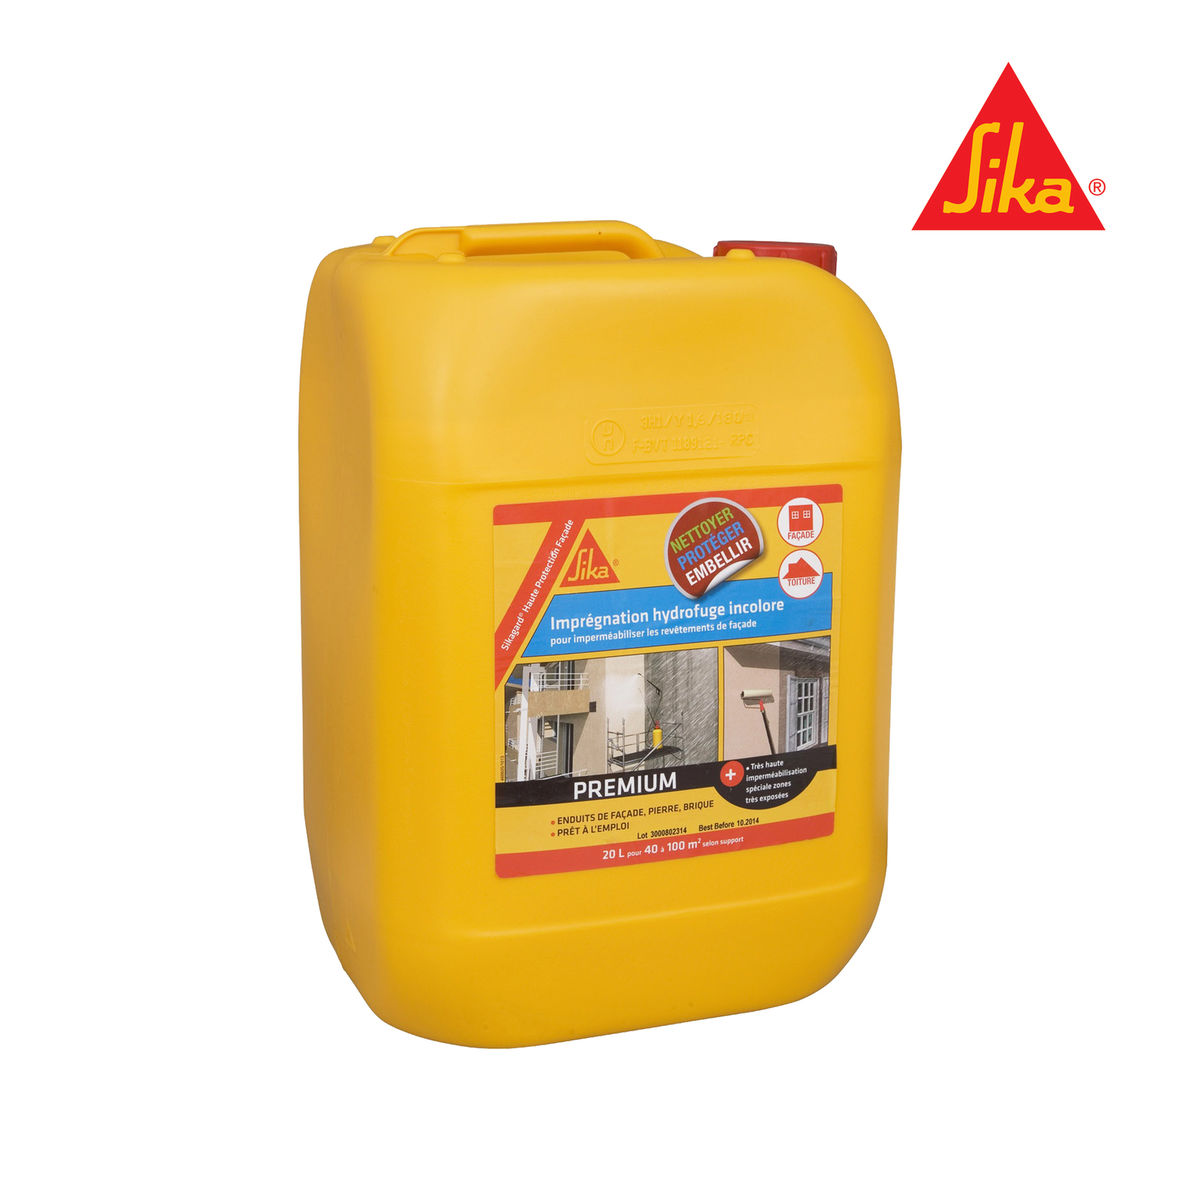 Hydrofuge Concentre Sika Sikagard Haute Protection Facade - 20l